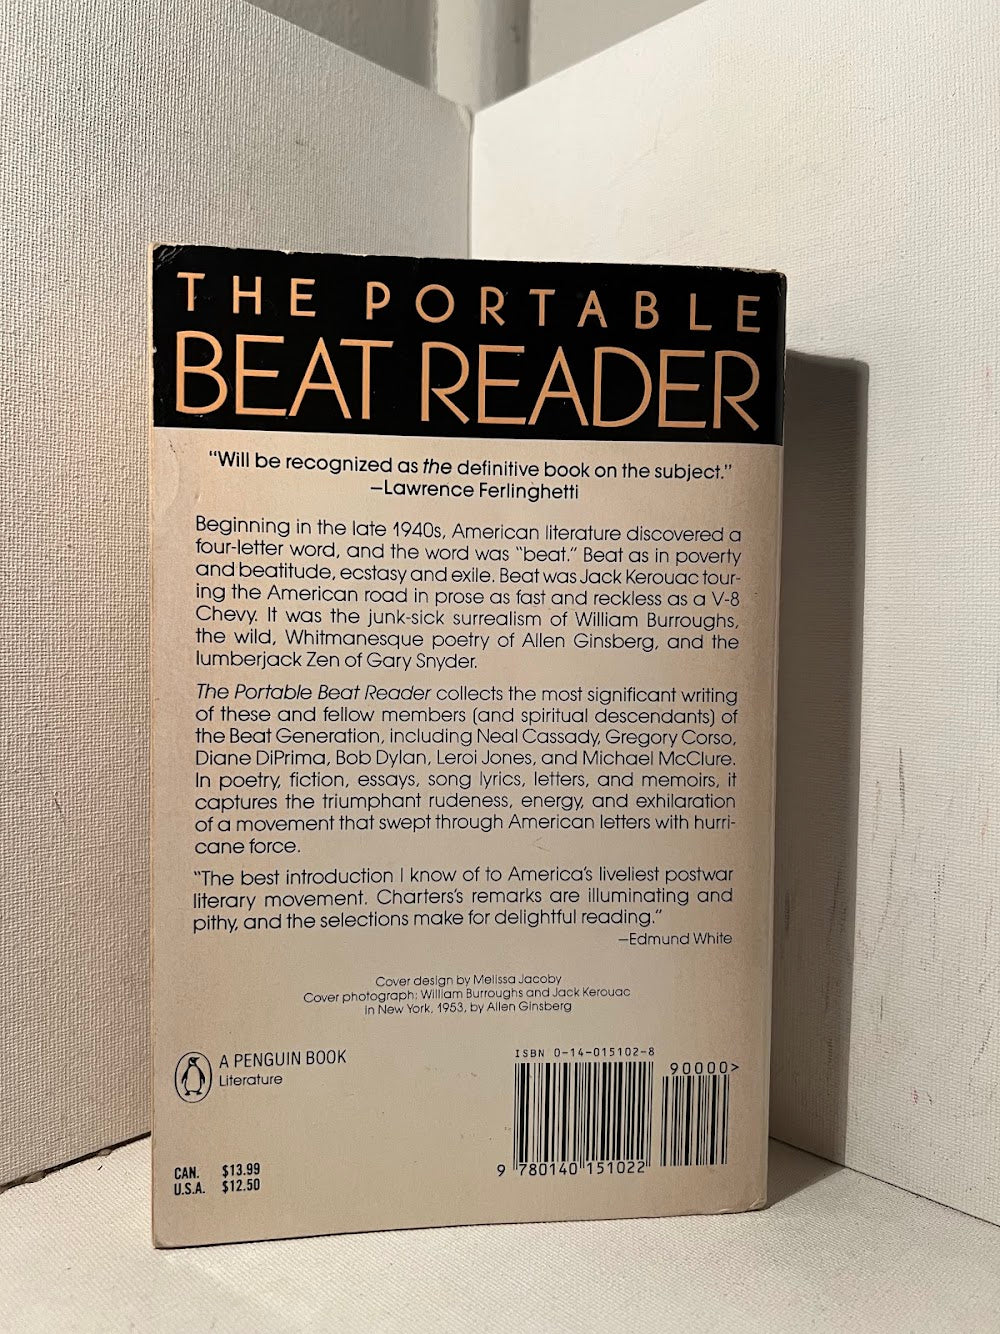 The Portable Beat Reader edited by Ann Charters